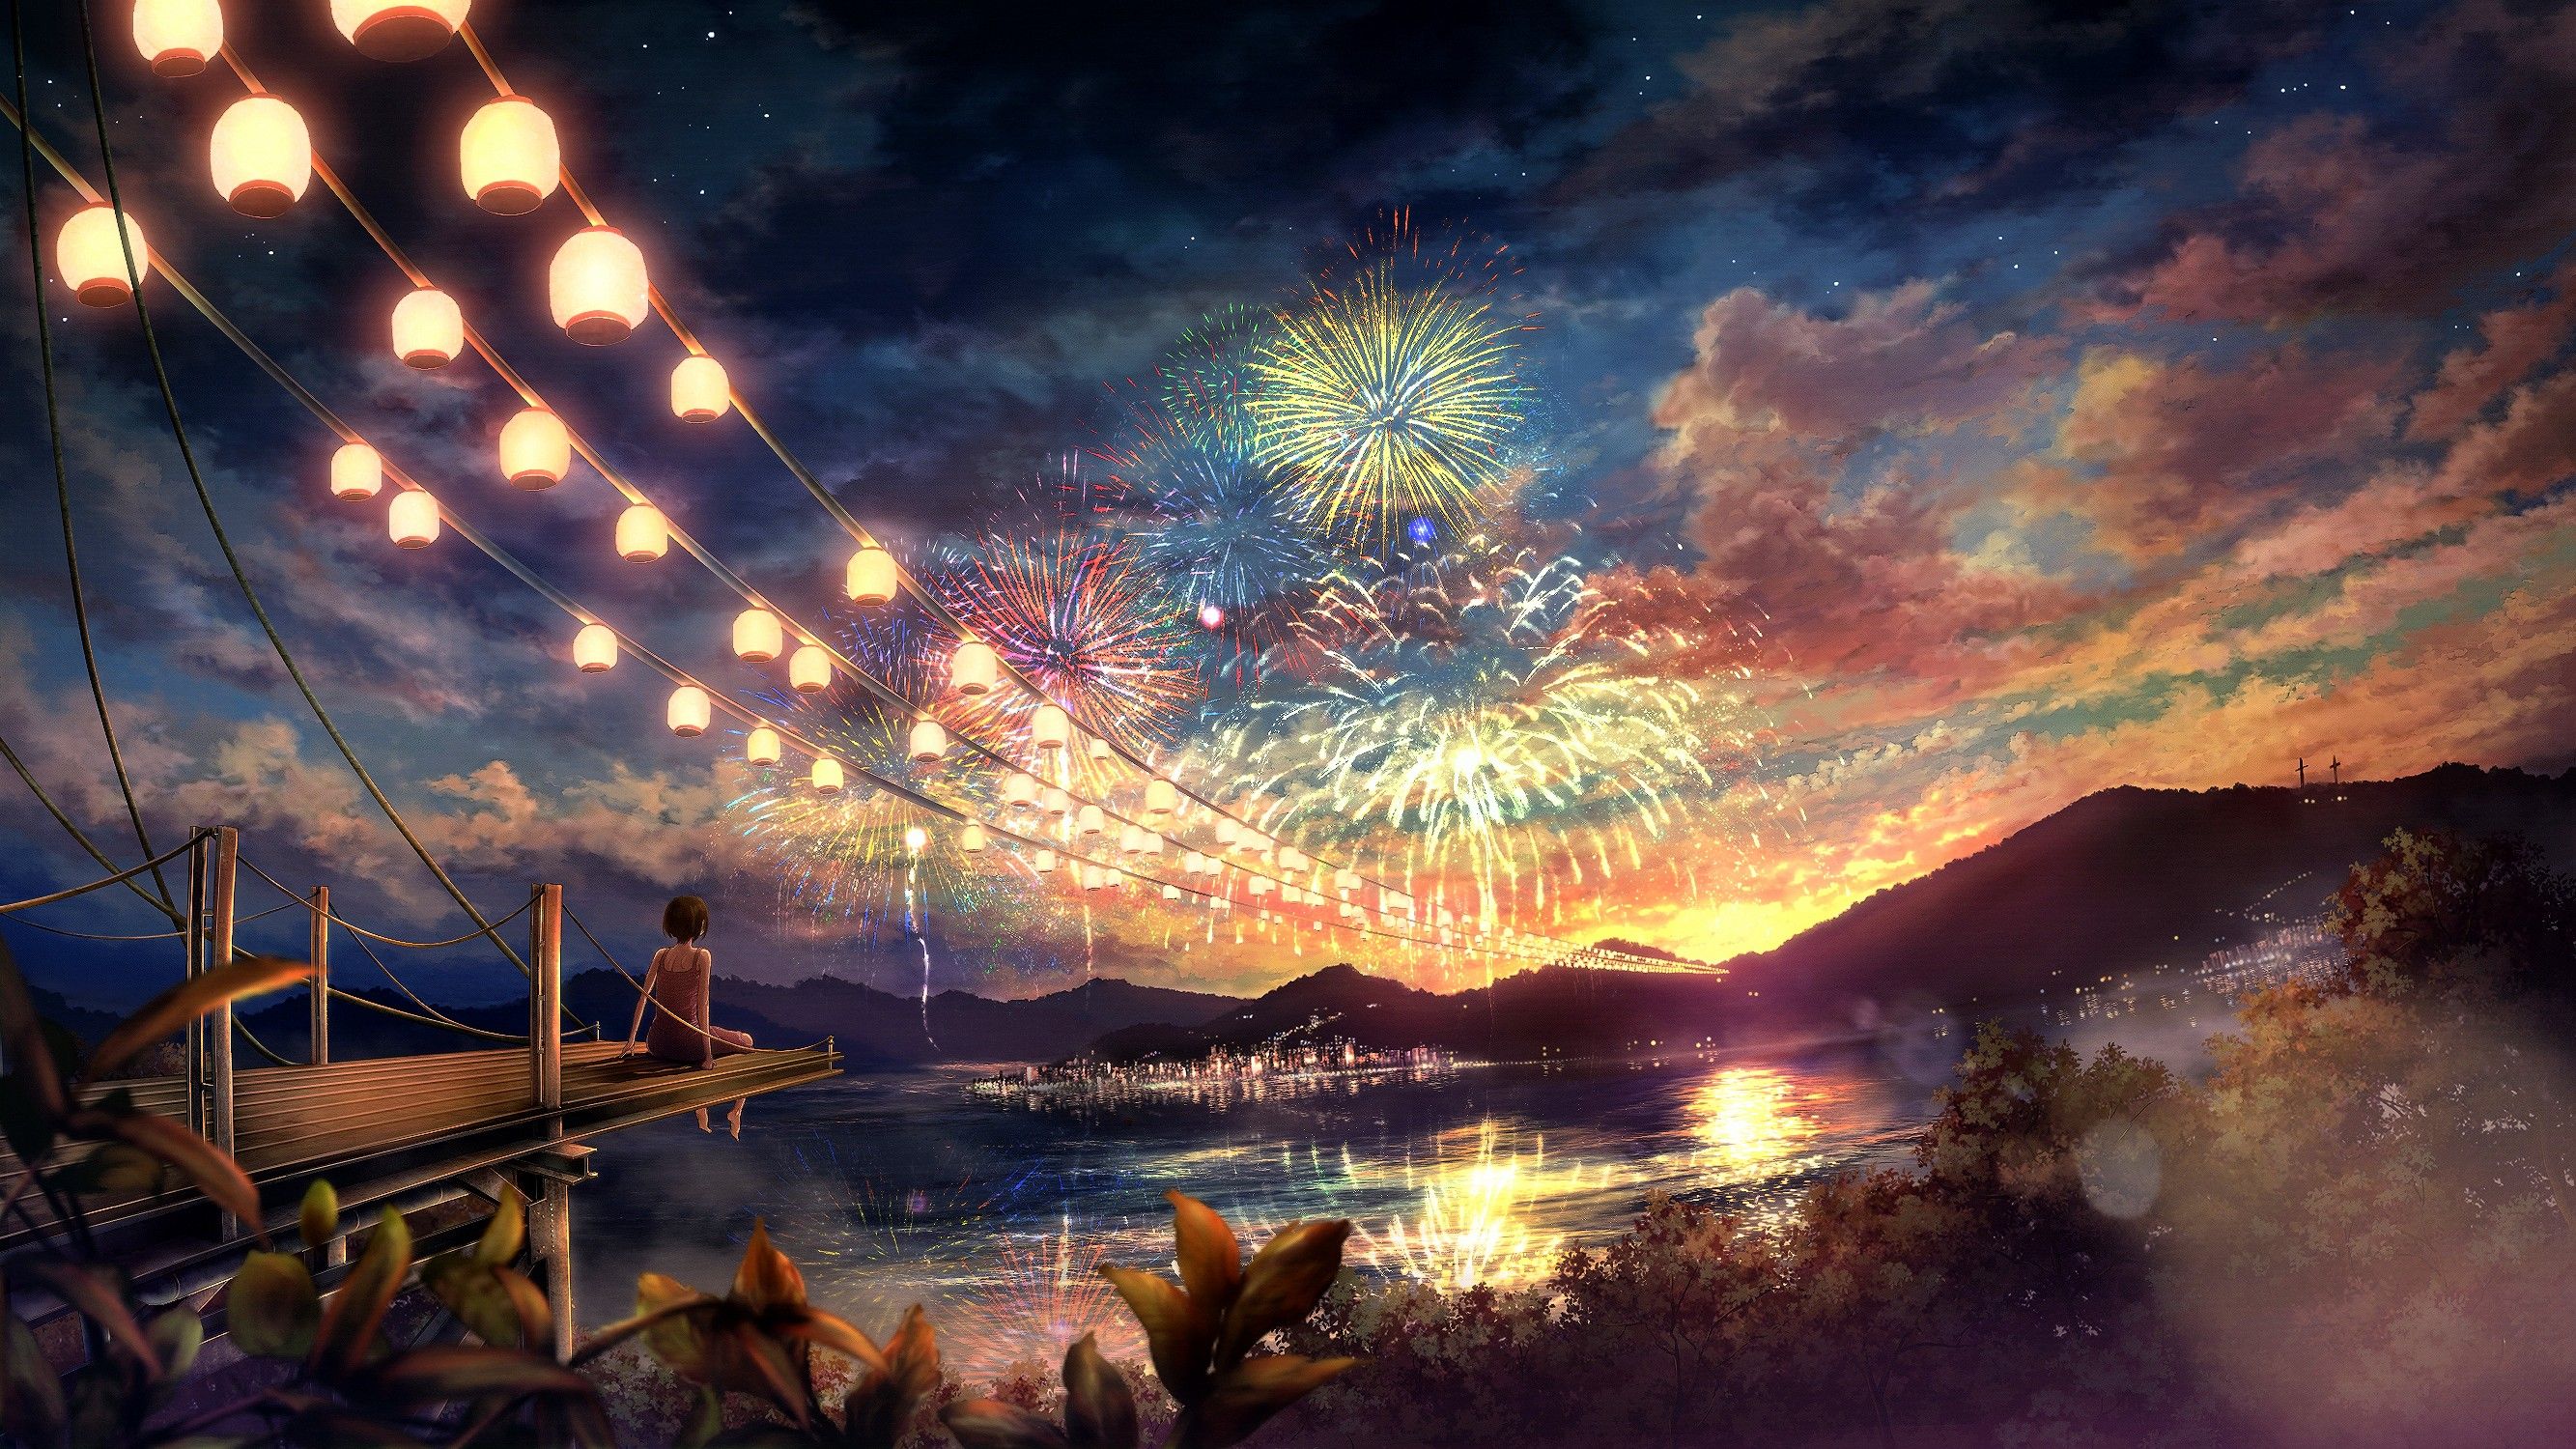 Clouds landscapes trees fireworks scenic anime anime girls cities chinese lantern wallpaperx1500